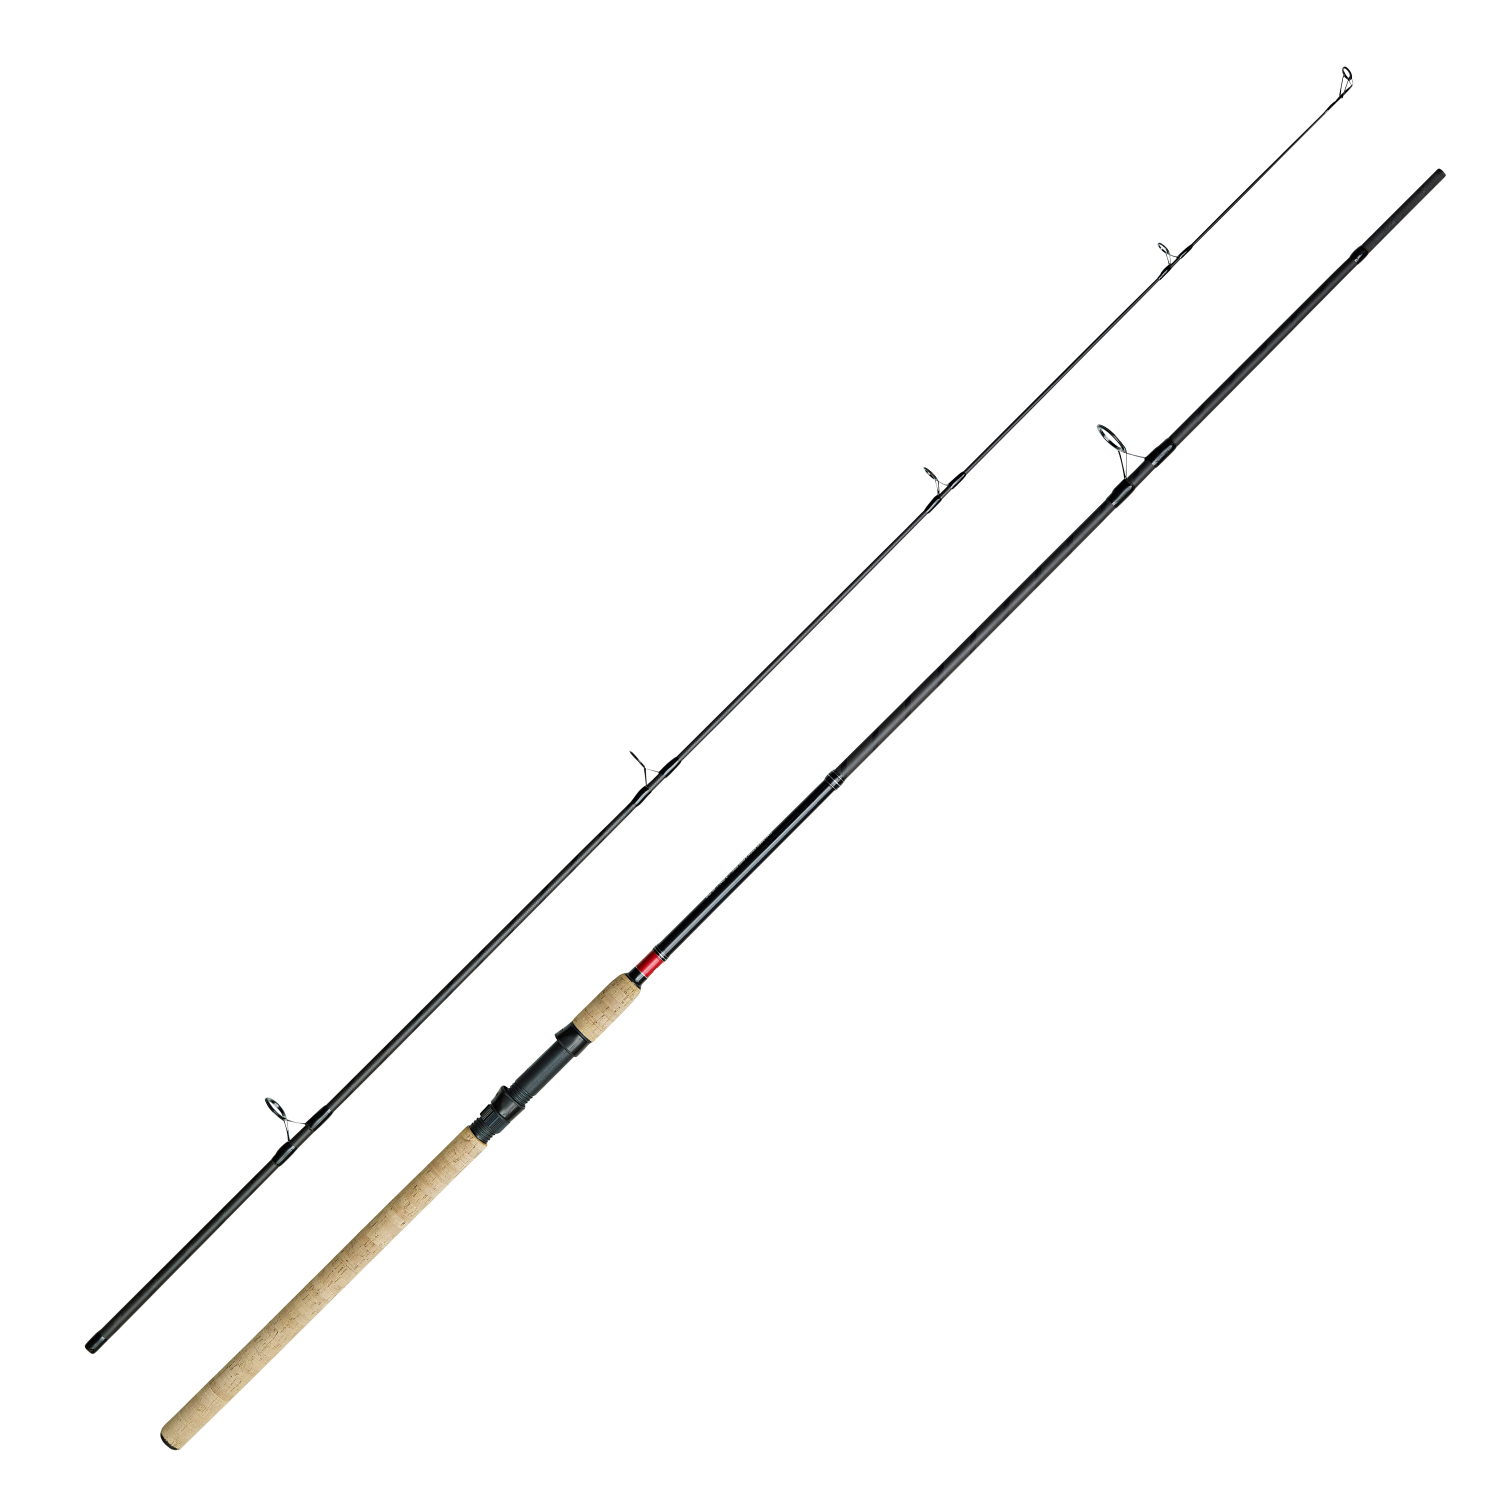 DAM Spin Fishing Rod Spezi Stick II at low prices